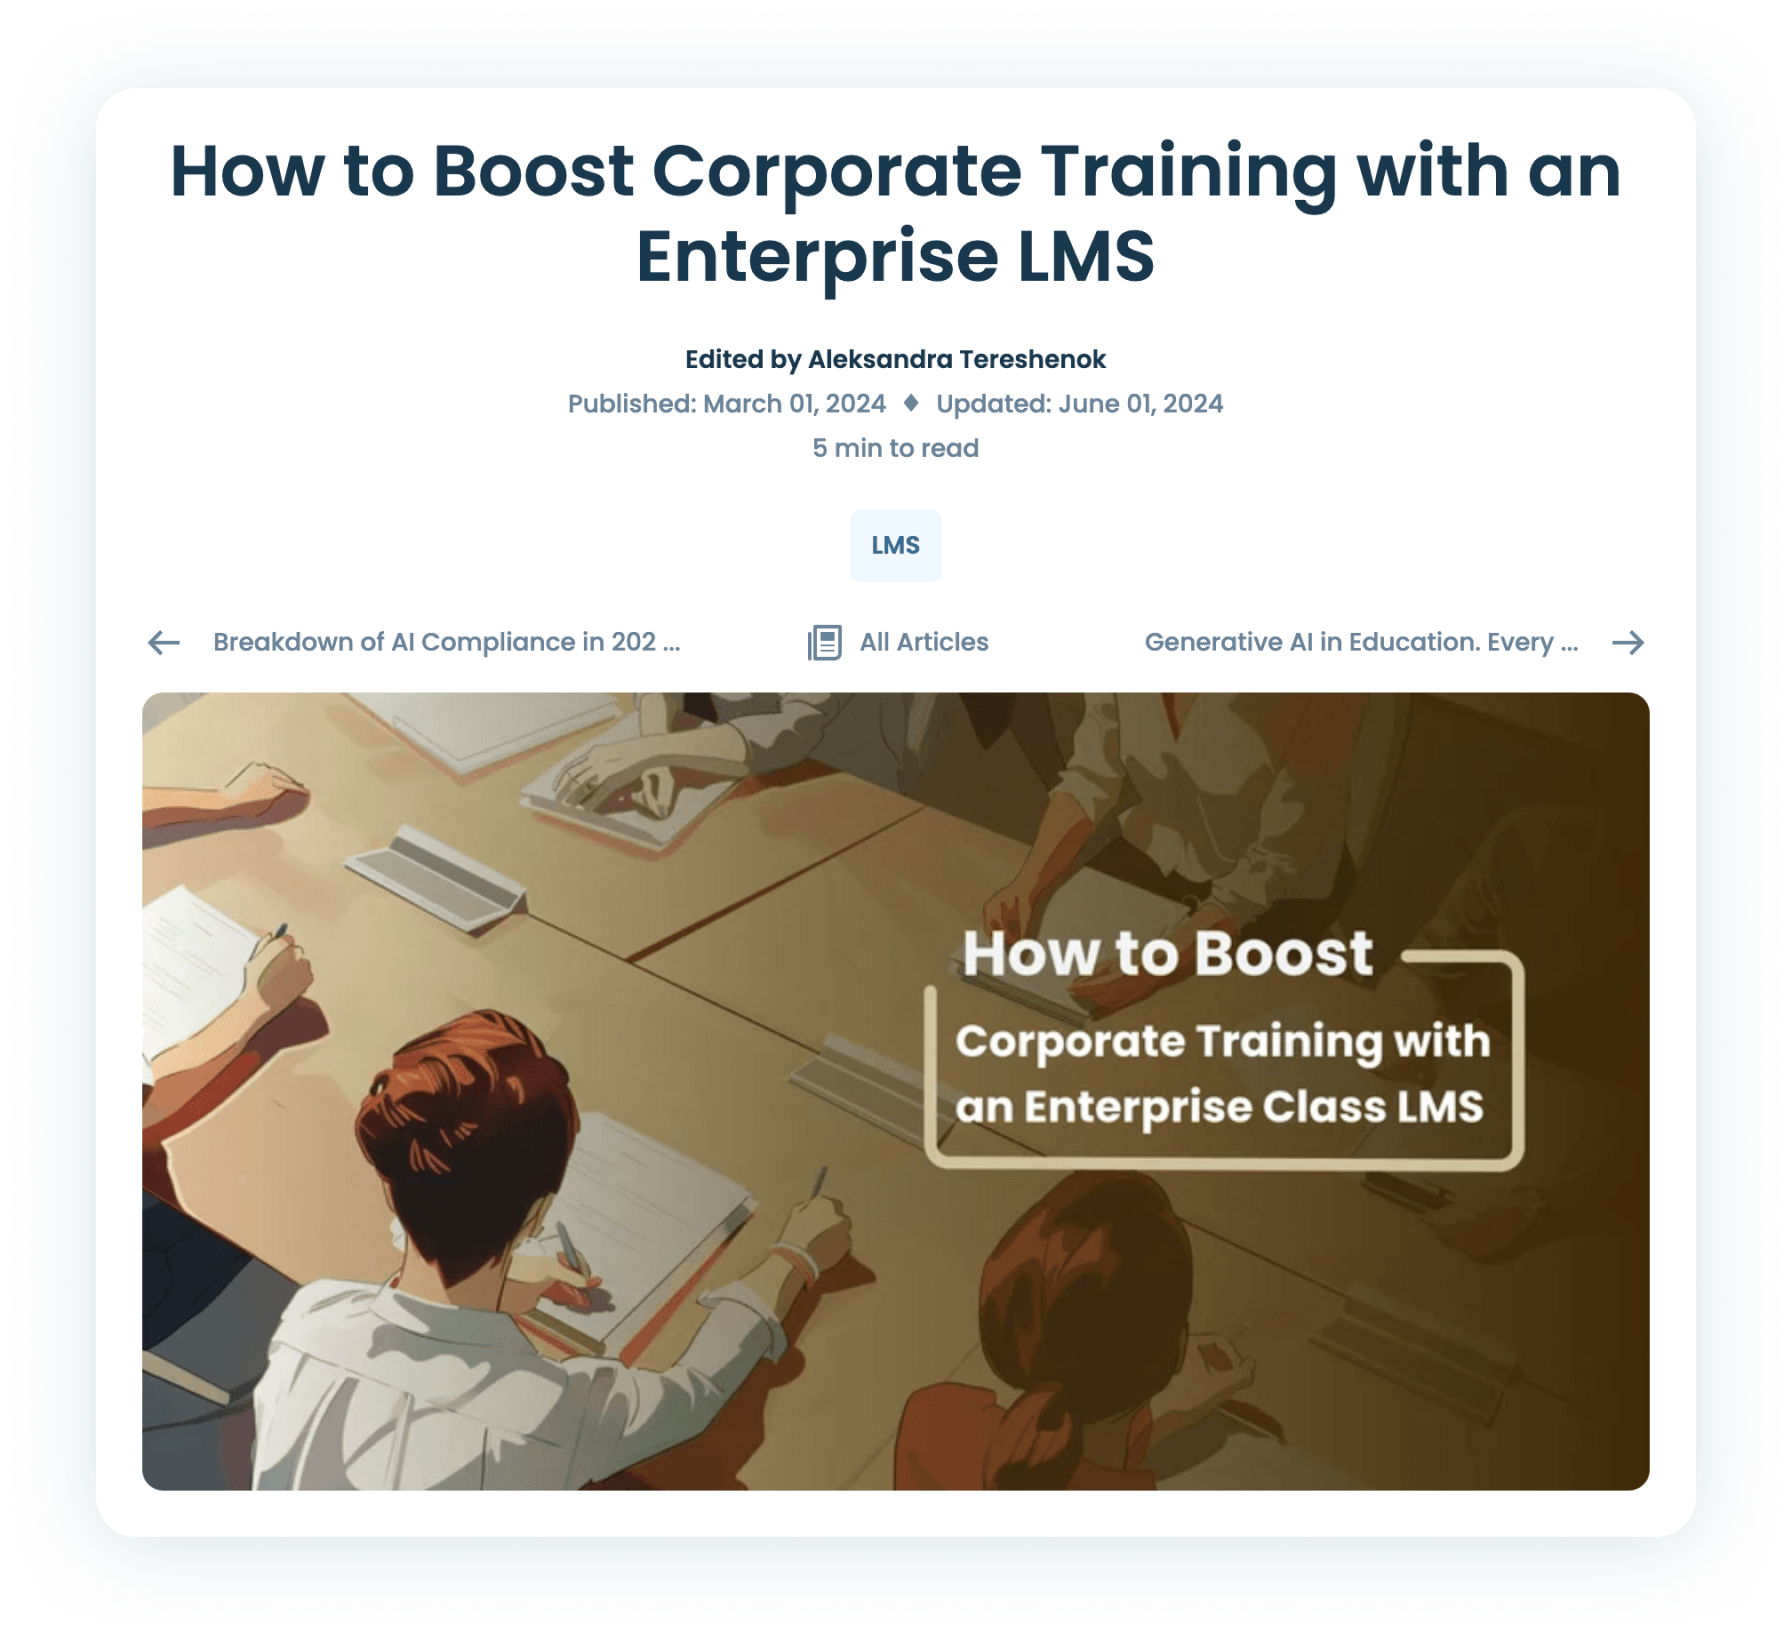 How to Boost Corporate Training with an Enterprise LMS